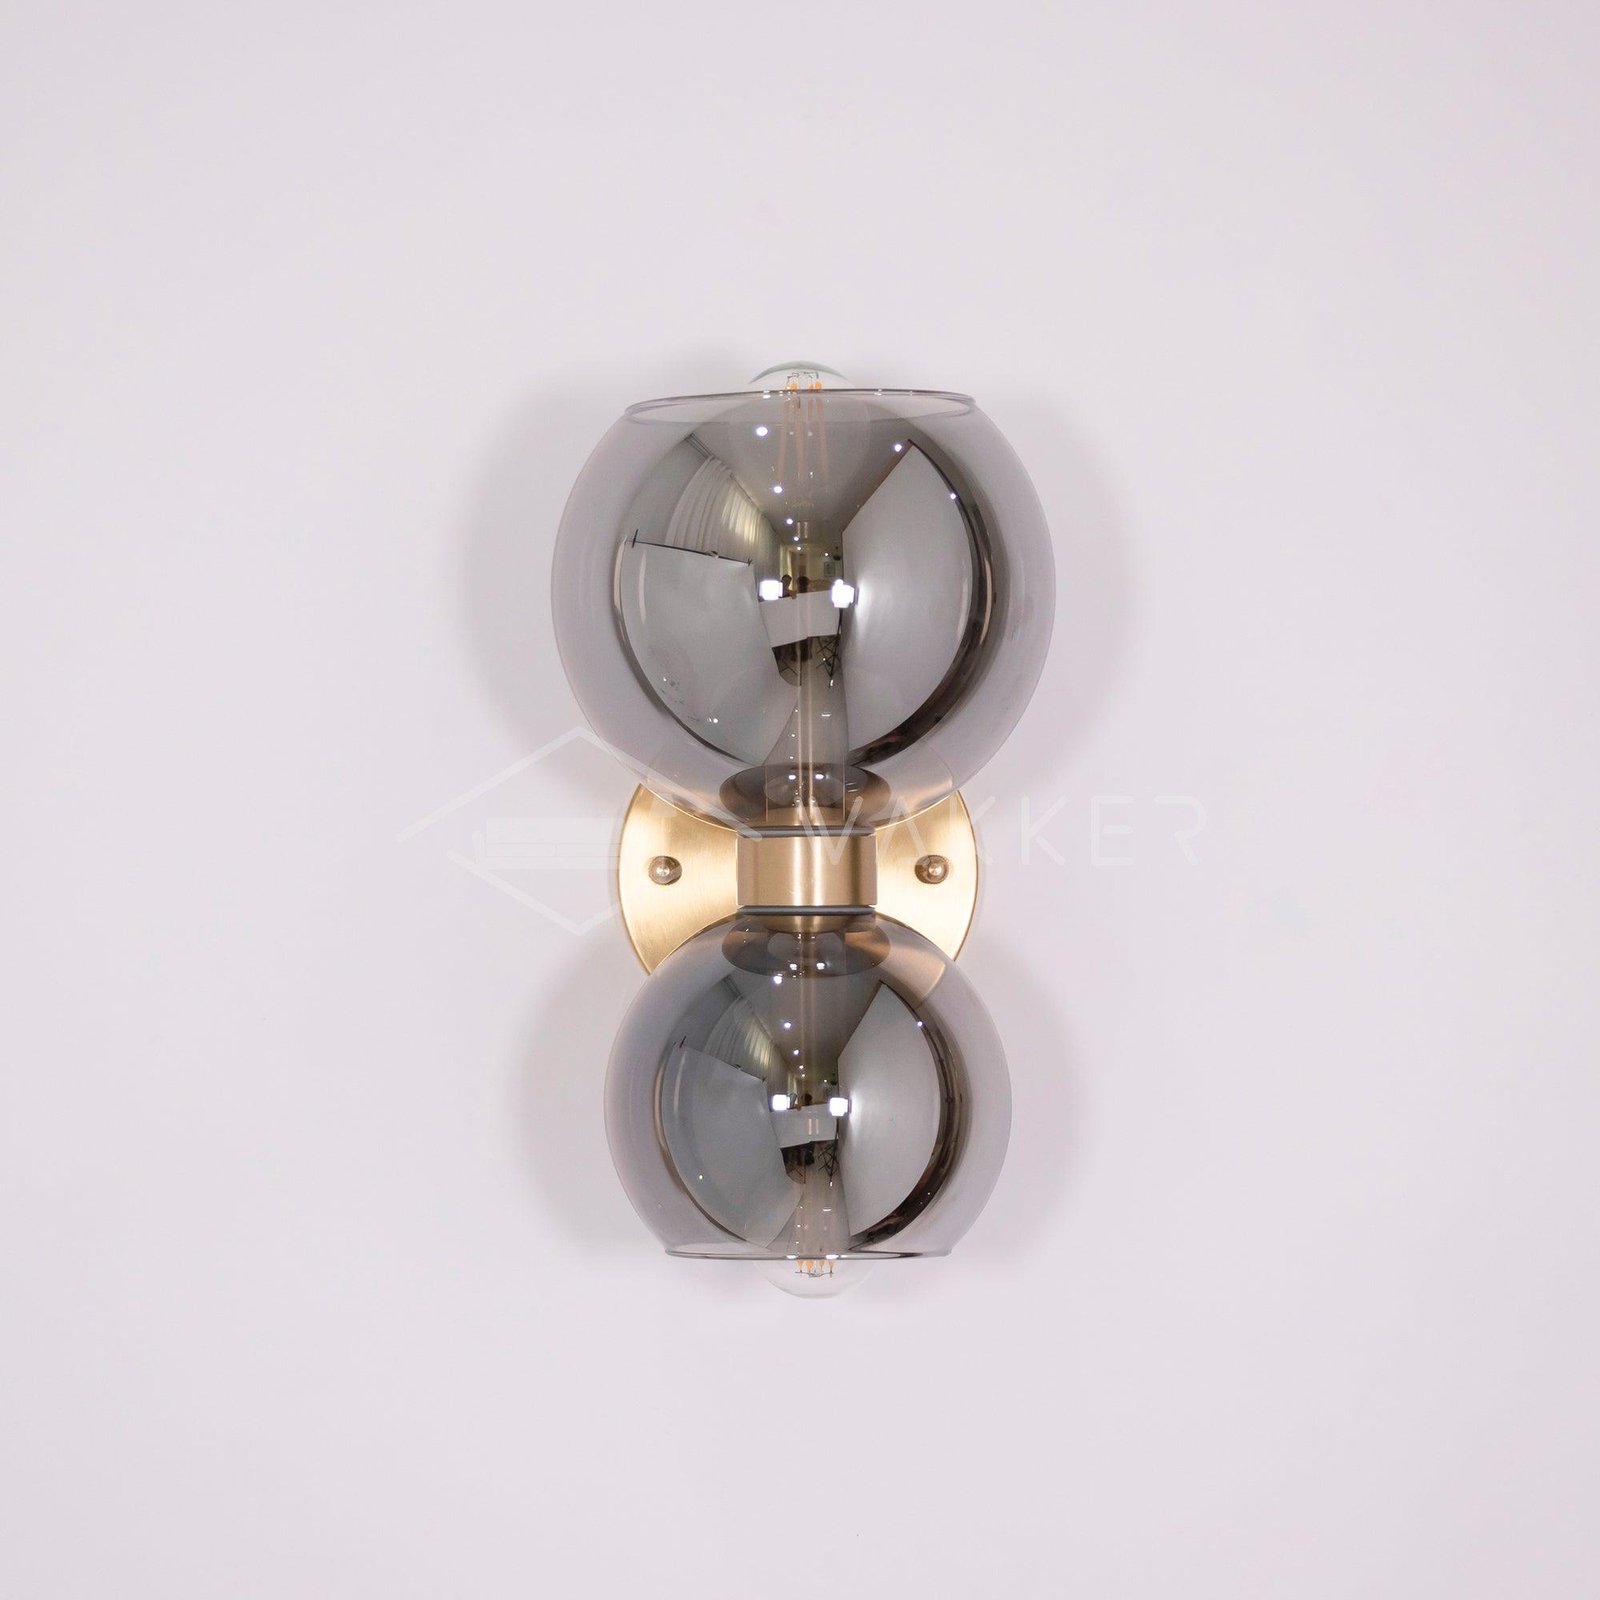 Satin Brass and Chrome Round Pearl Sconce, Diameter 5.9 Inches x Height 9.8 Inches (15cm x 25cm)